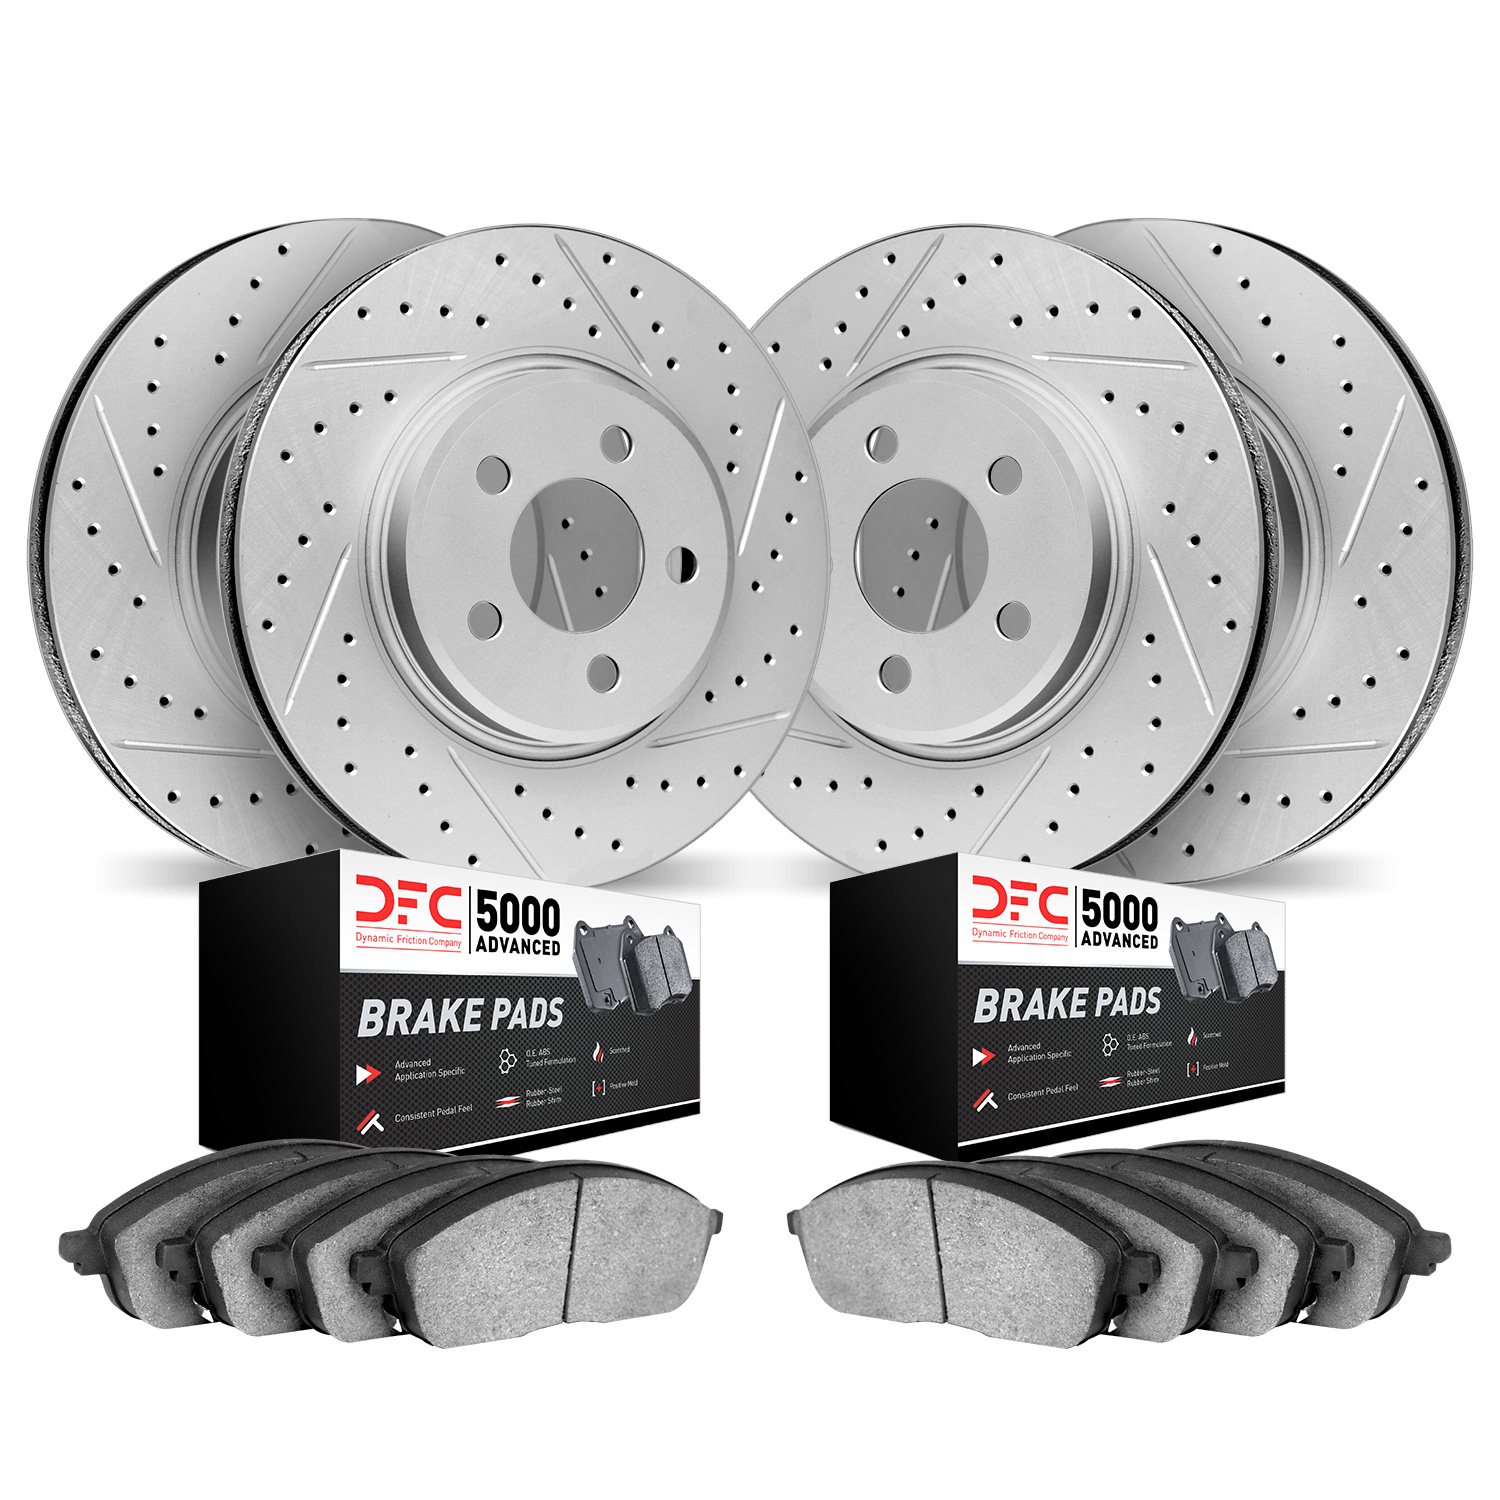 2504-54198 Geoperformance Drilled/Slotted Rotors w/5000 Advanced Brake Pads Kit, 2005-2010 Ford/Lincoln/Mercury/Mazda, Position: